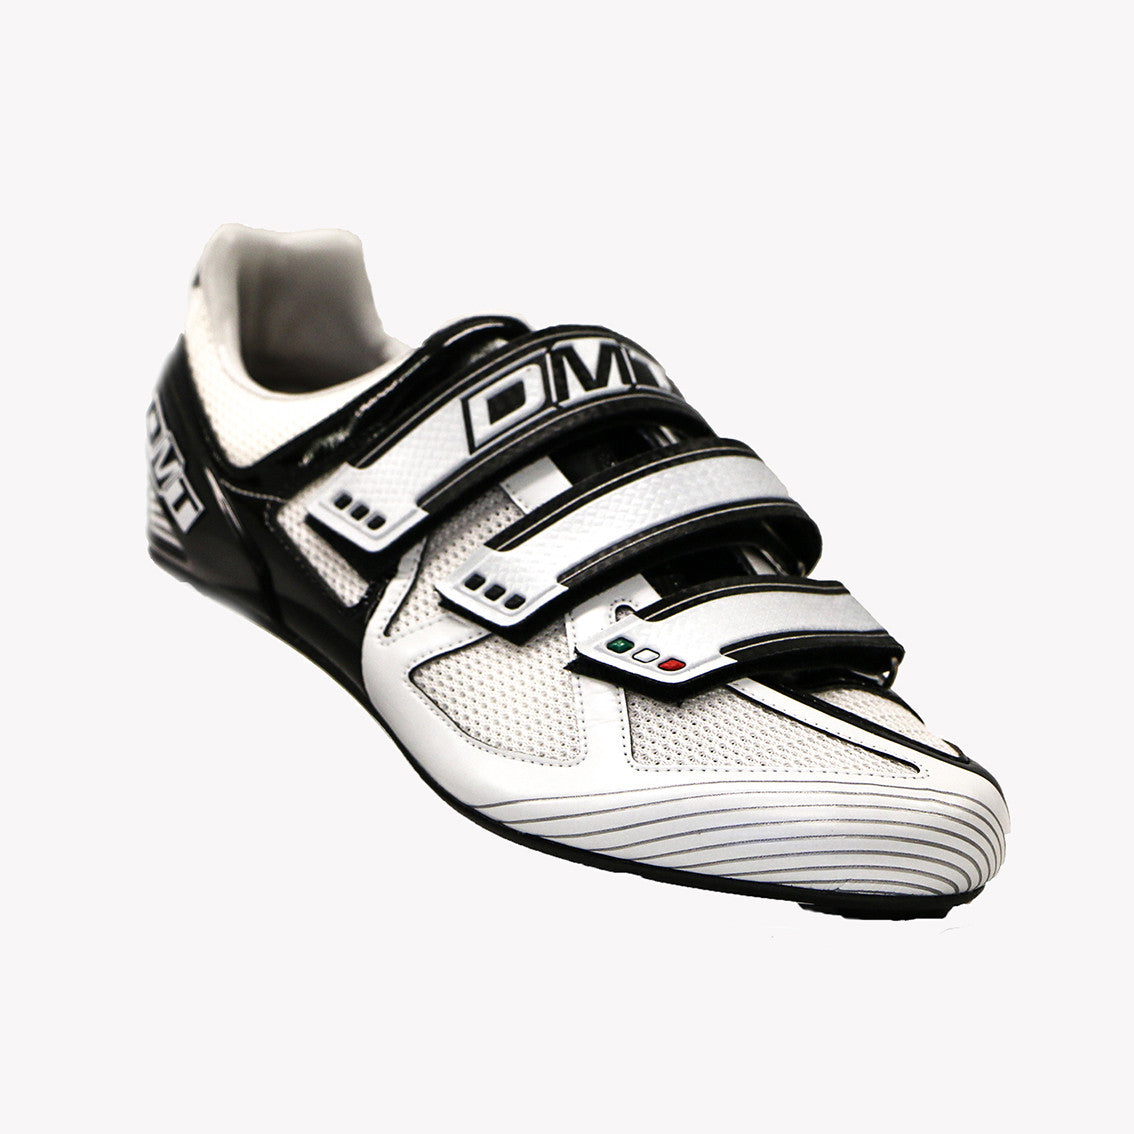 speedplay specific shoes